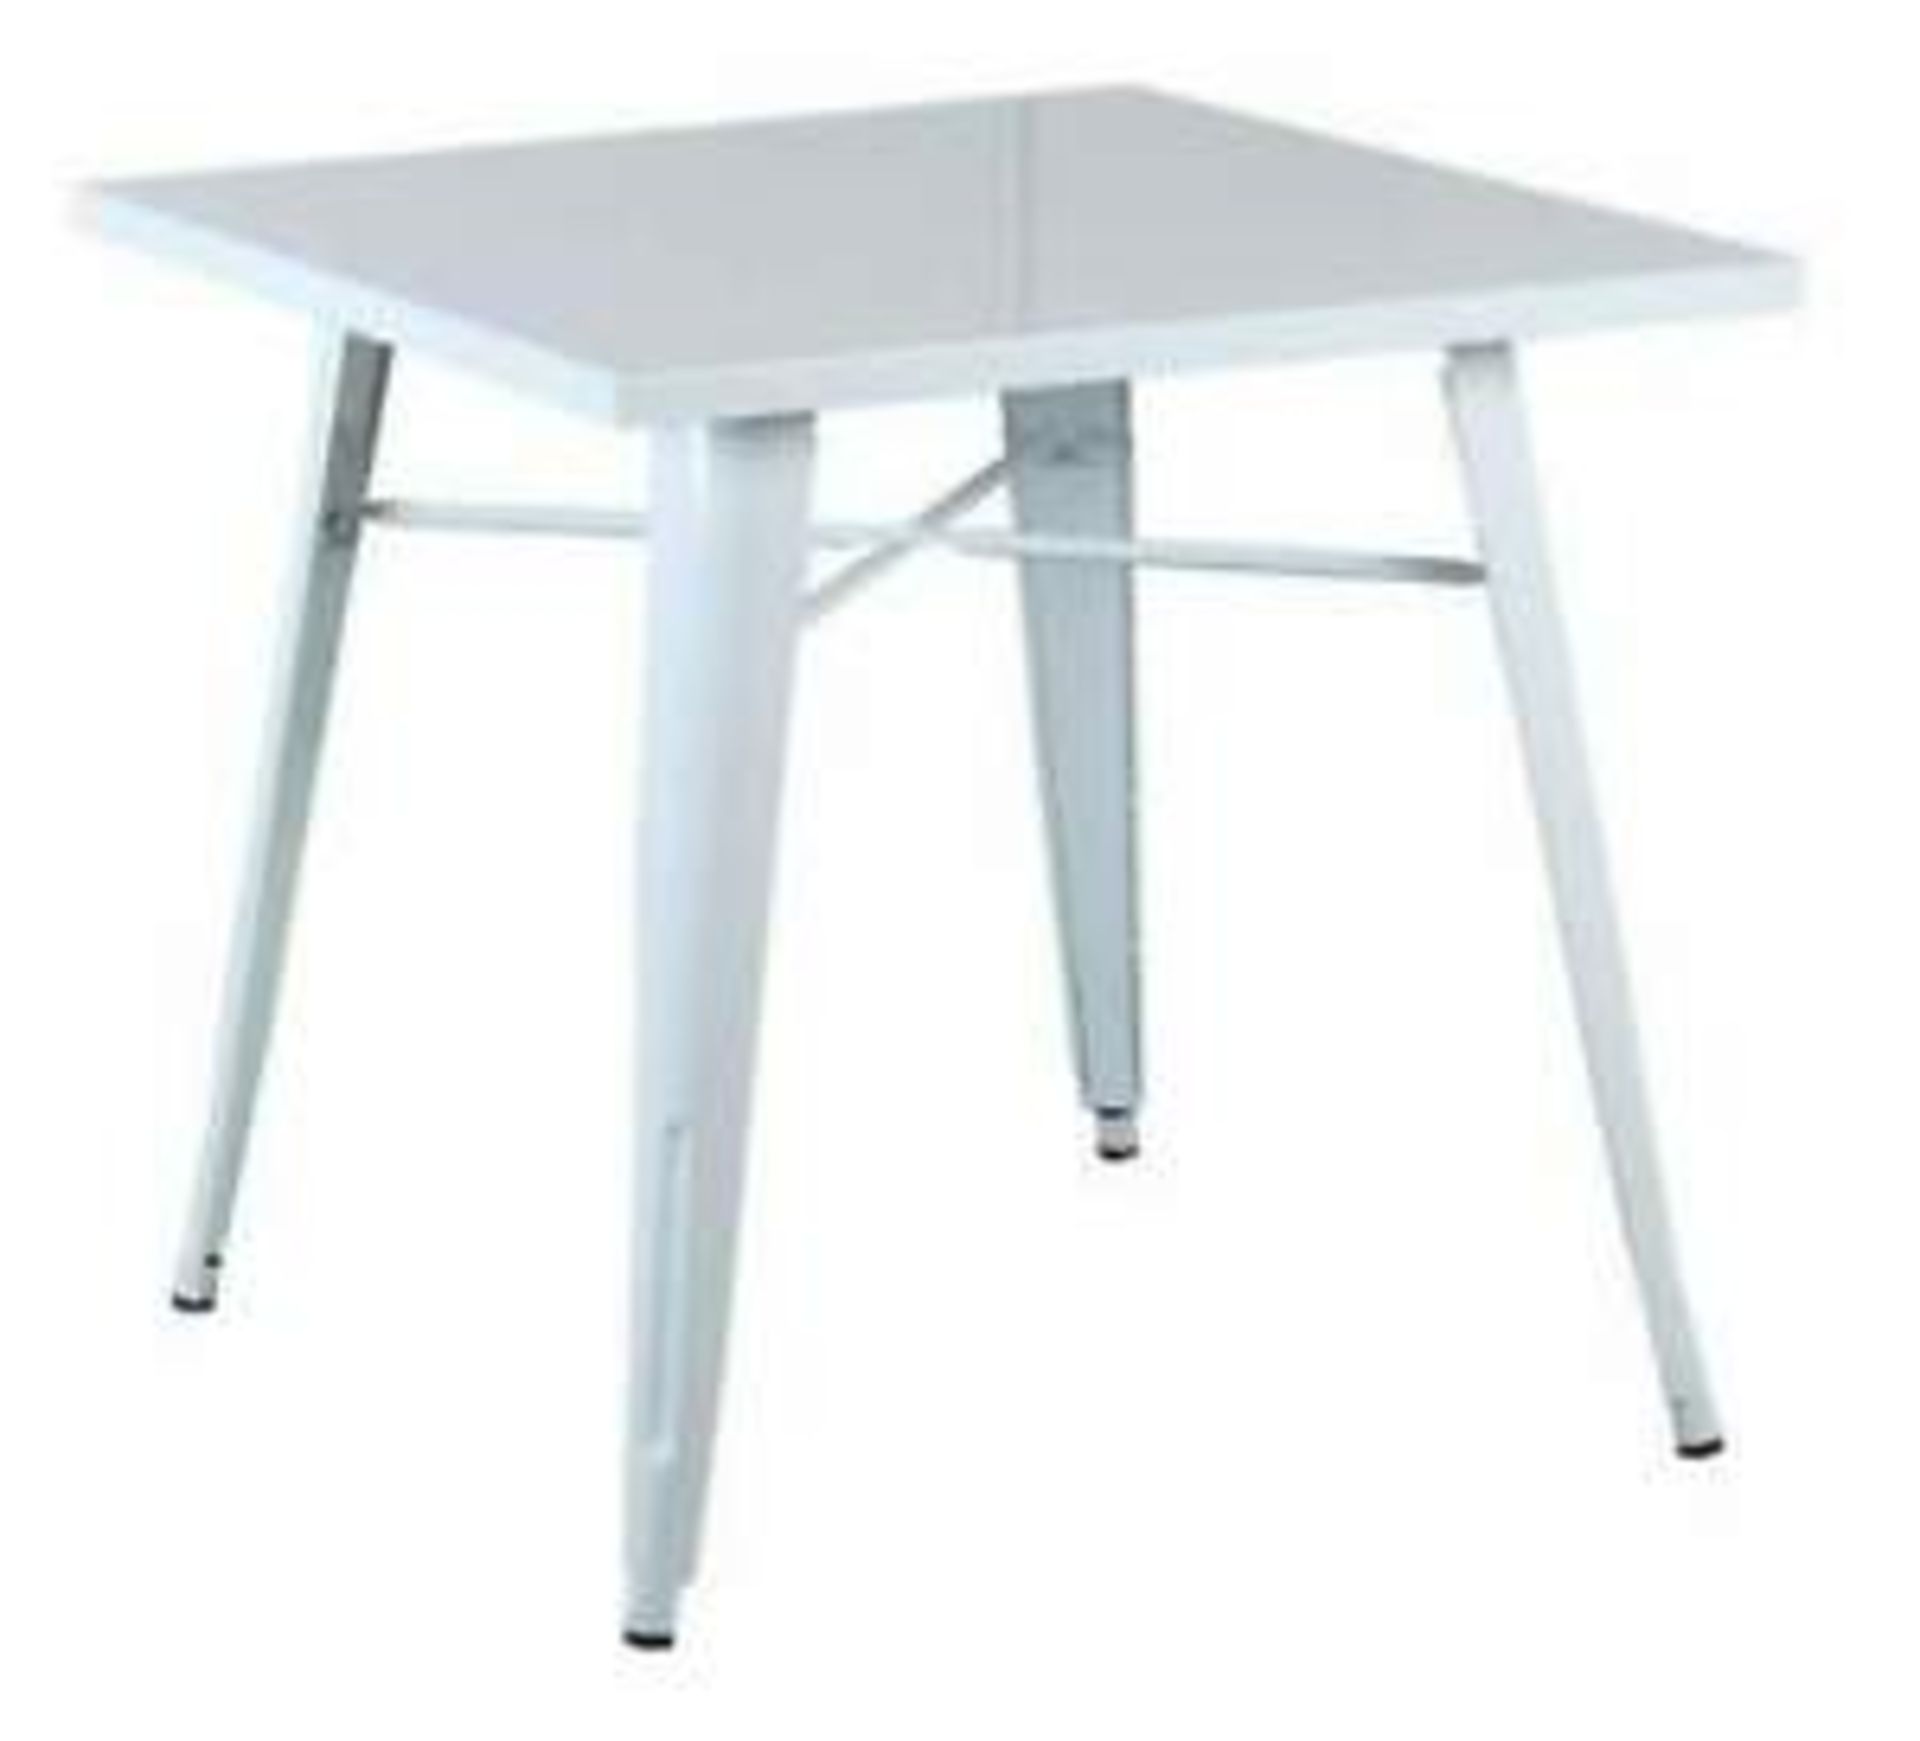 1 x Tolix Industrial Style Outdoor Bistro Table and Chair Set in White- Includes 1 x Table and 4 x - Image 4 of 8